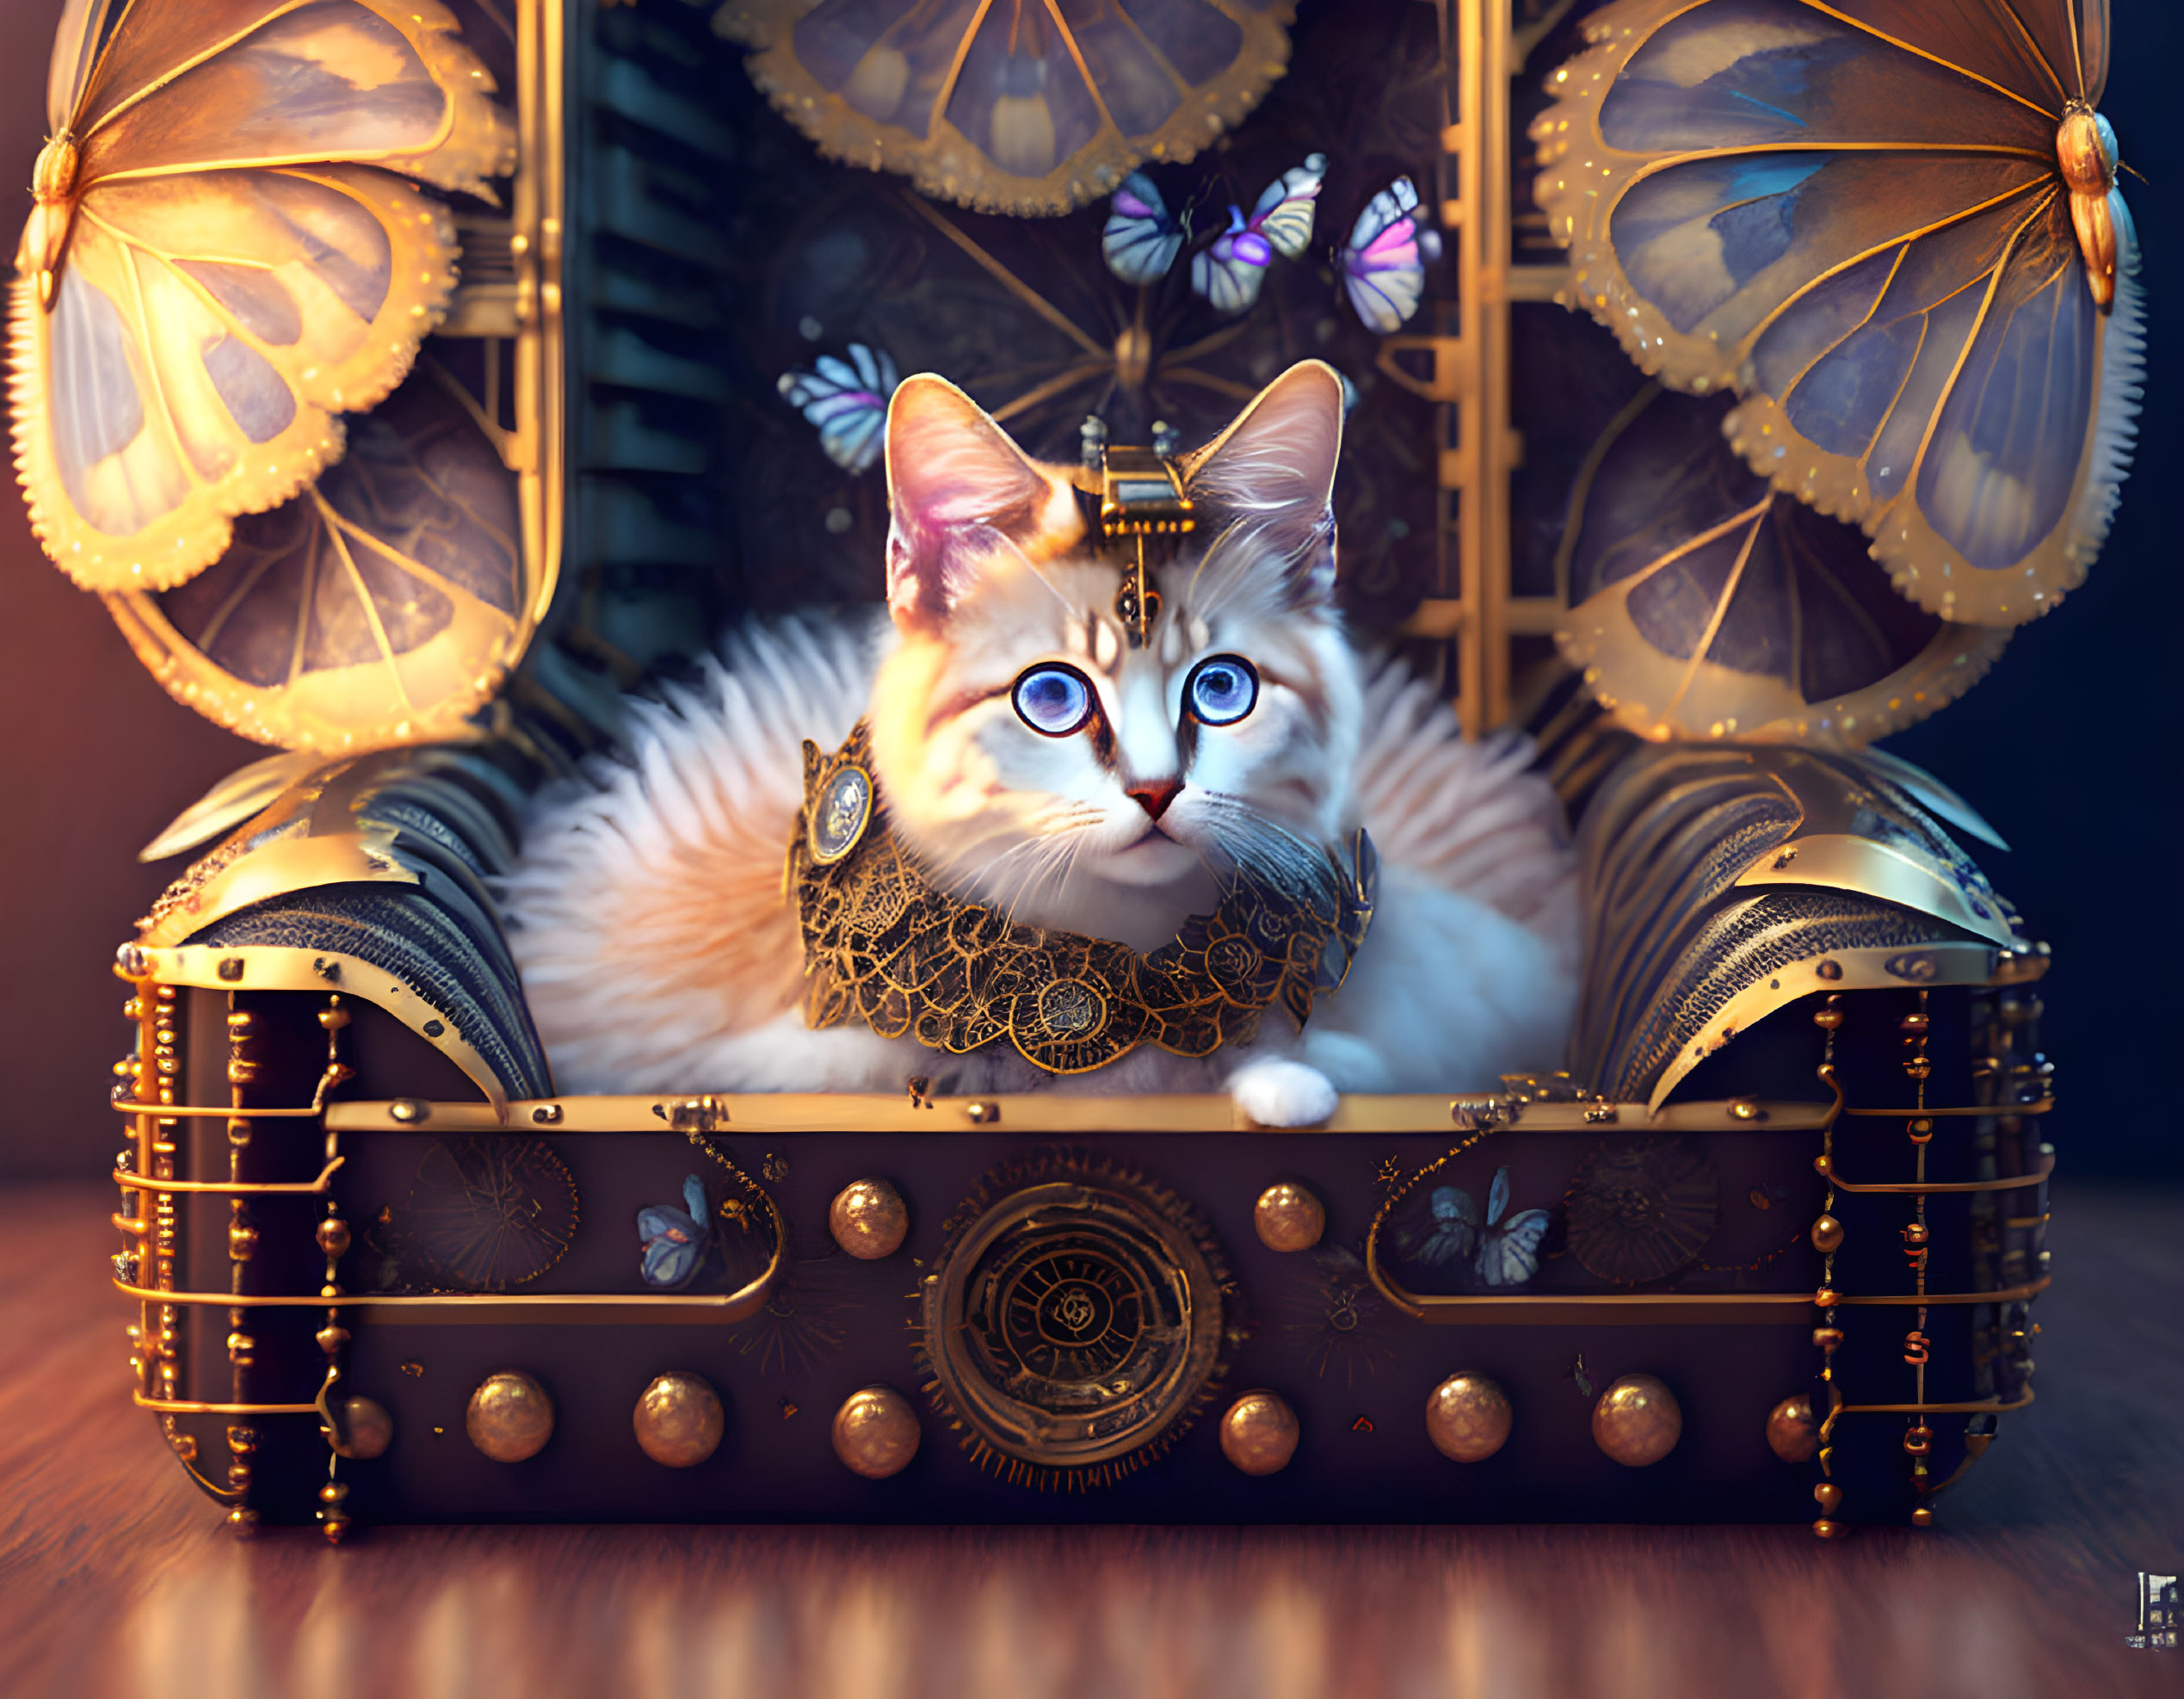 Steampunk cat with blue eyes and ornate mechanical wings in vintage box